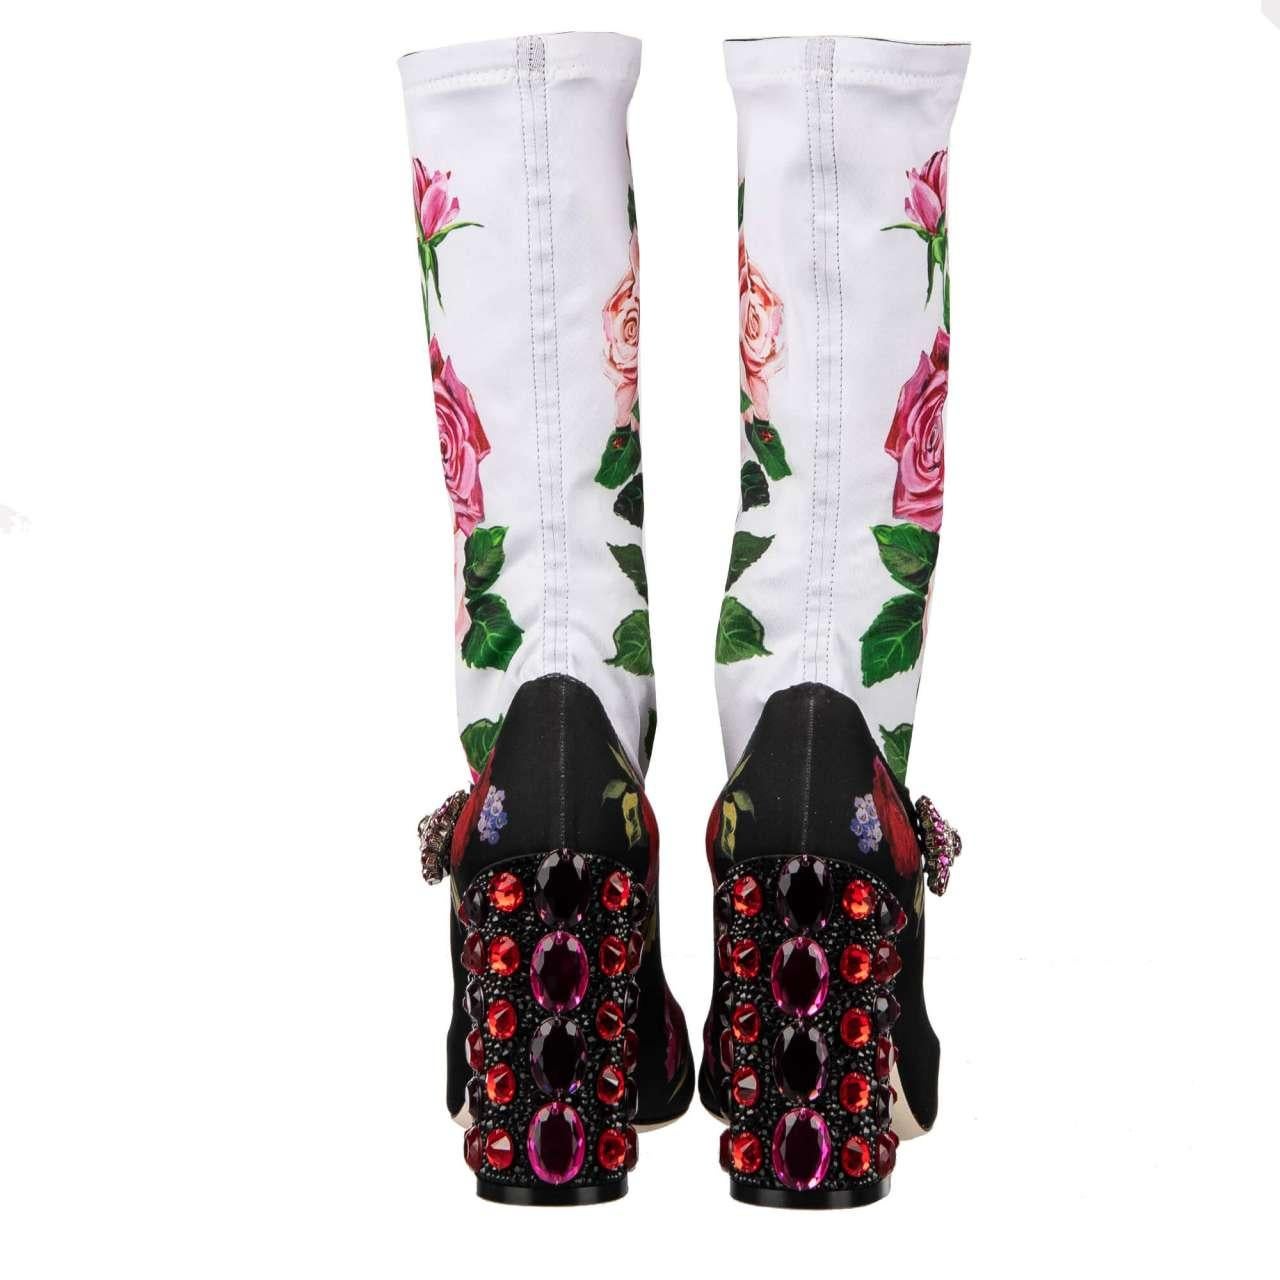 Women's D&G Roses Printed Elastic Socks Pumps VALLY with Crystals Heel Black White 40 For Sale